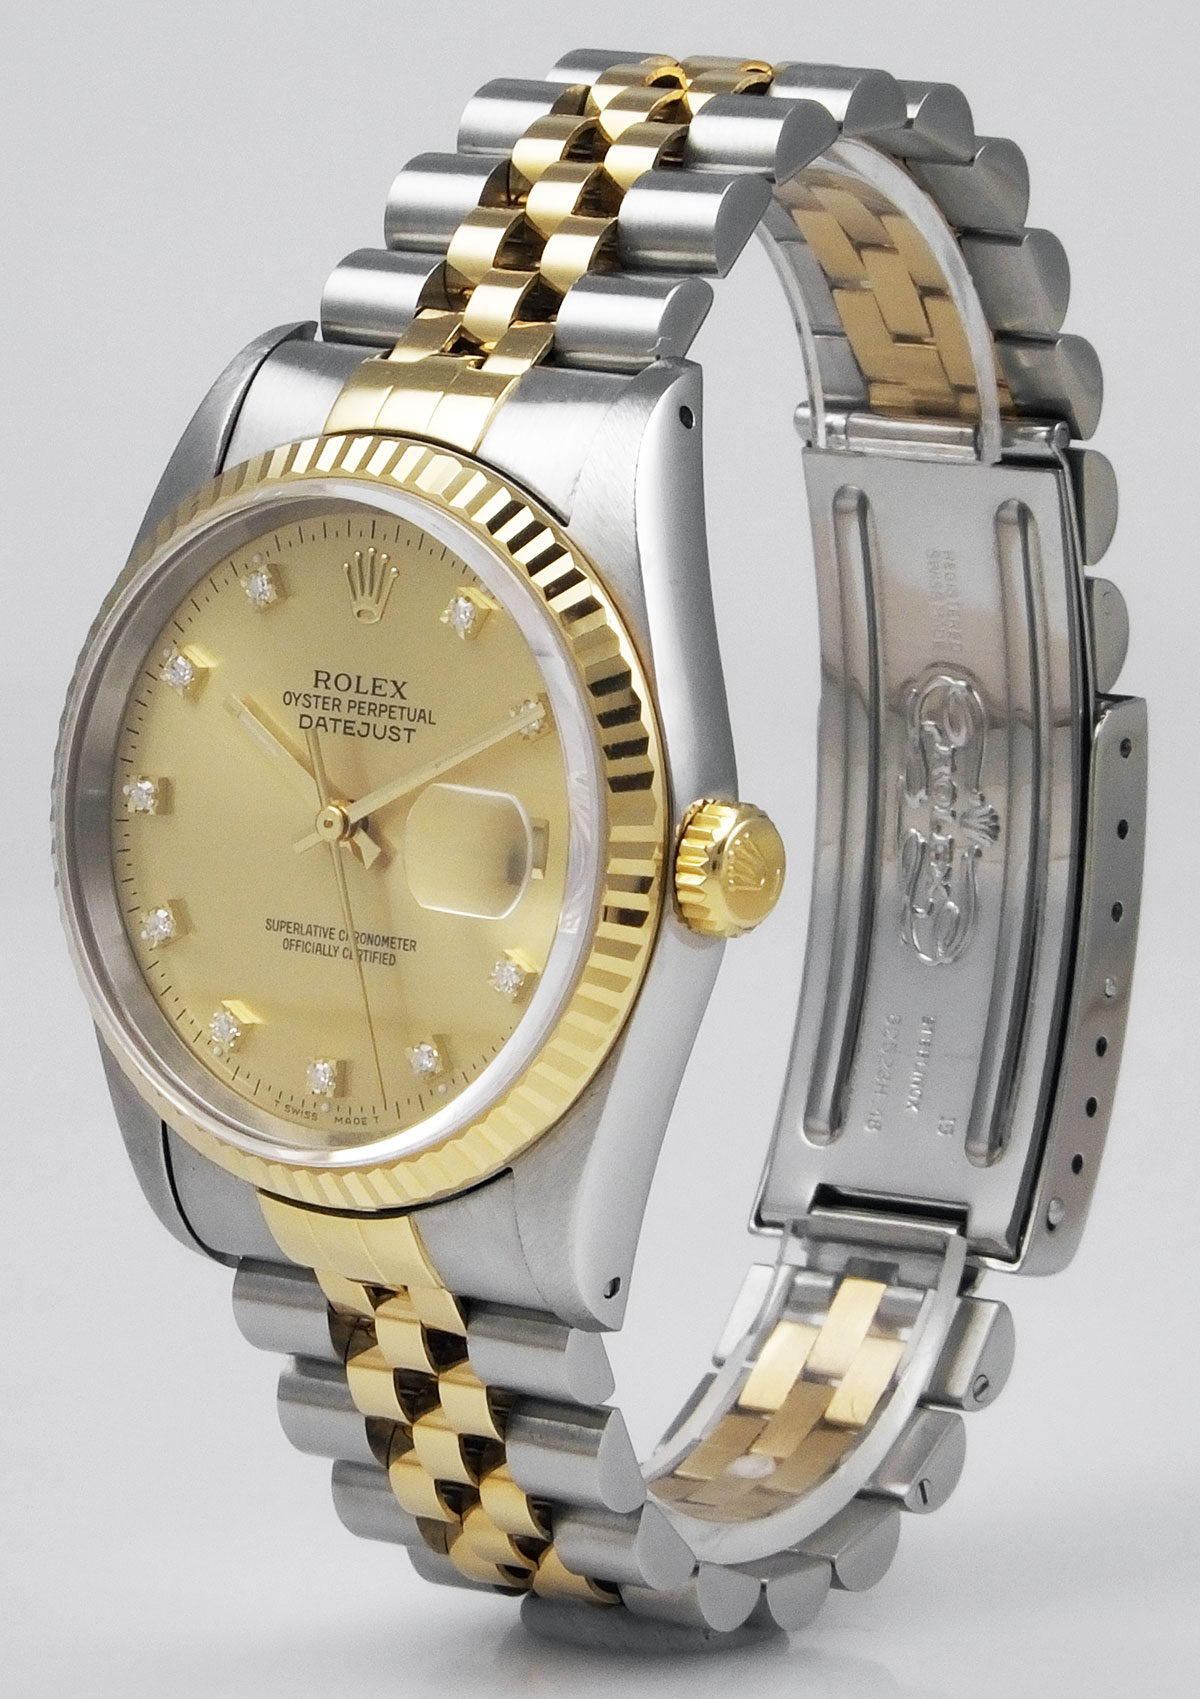 Rolex Oyster Perpetual DateJust 16233 - Champagne Diamond Dial (1988)